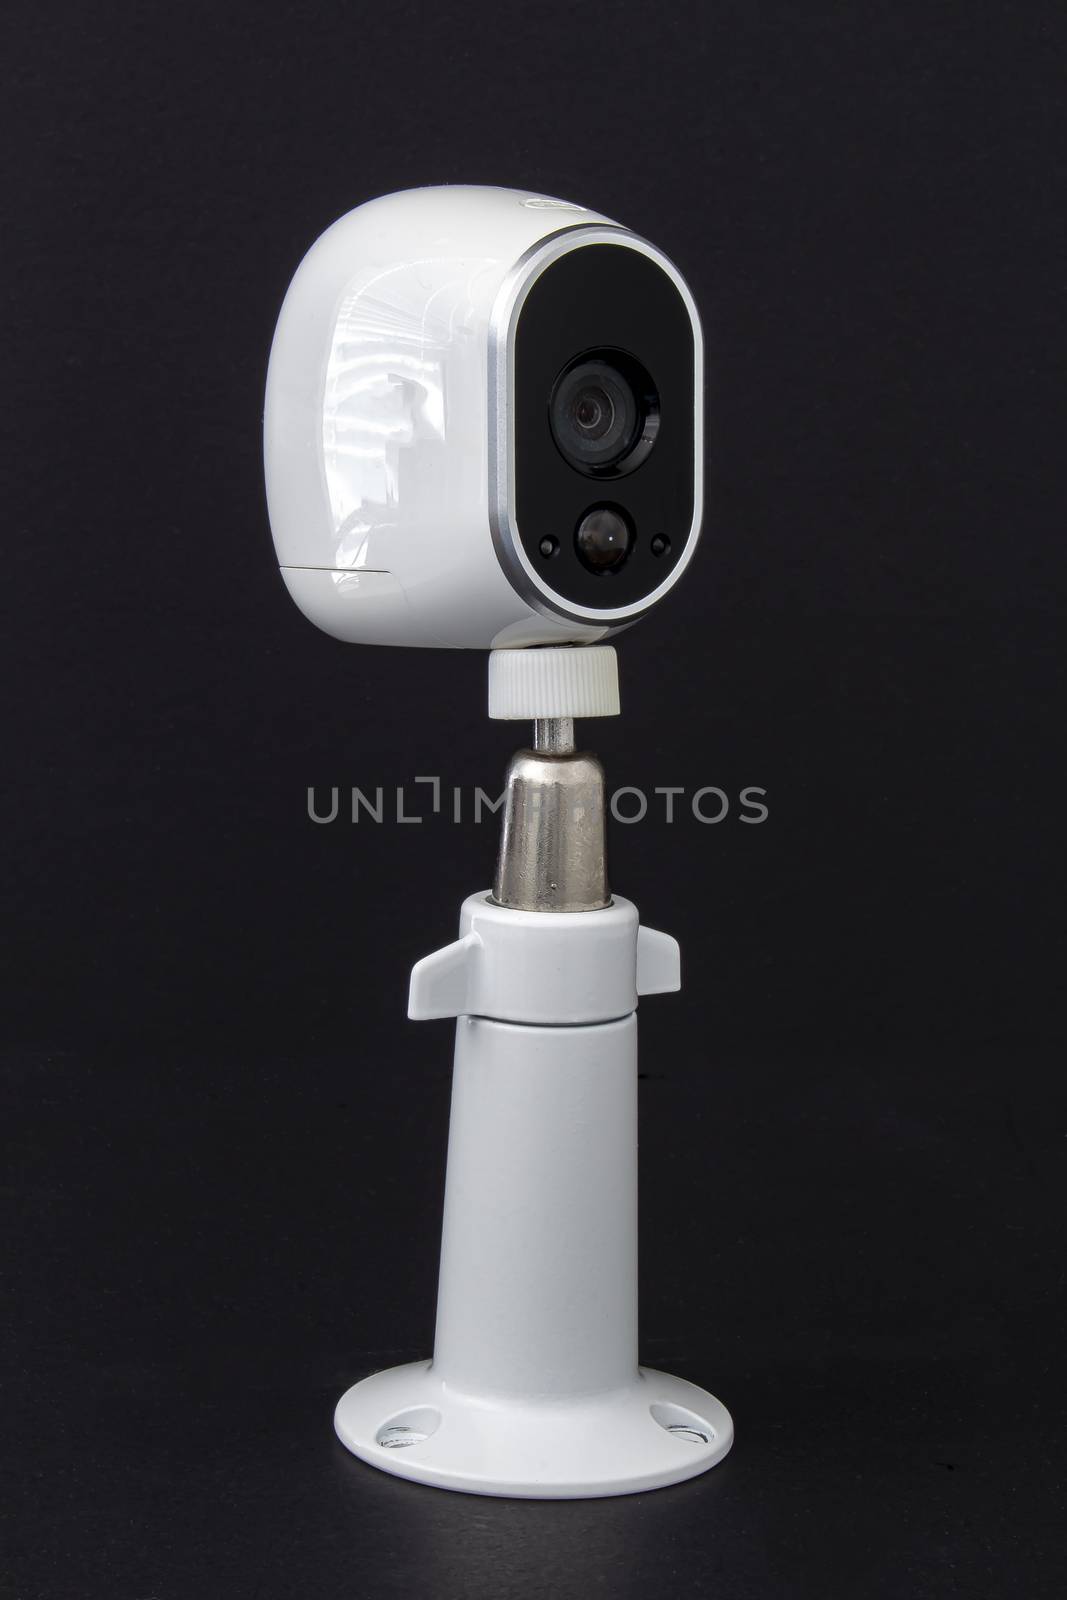 An Arlo security camera on black background by oasisamuel